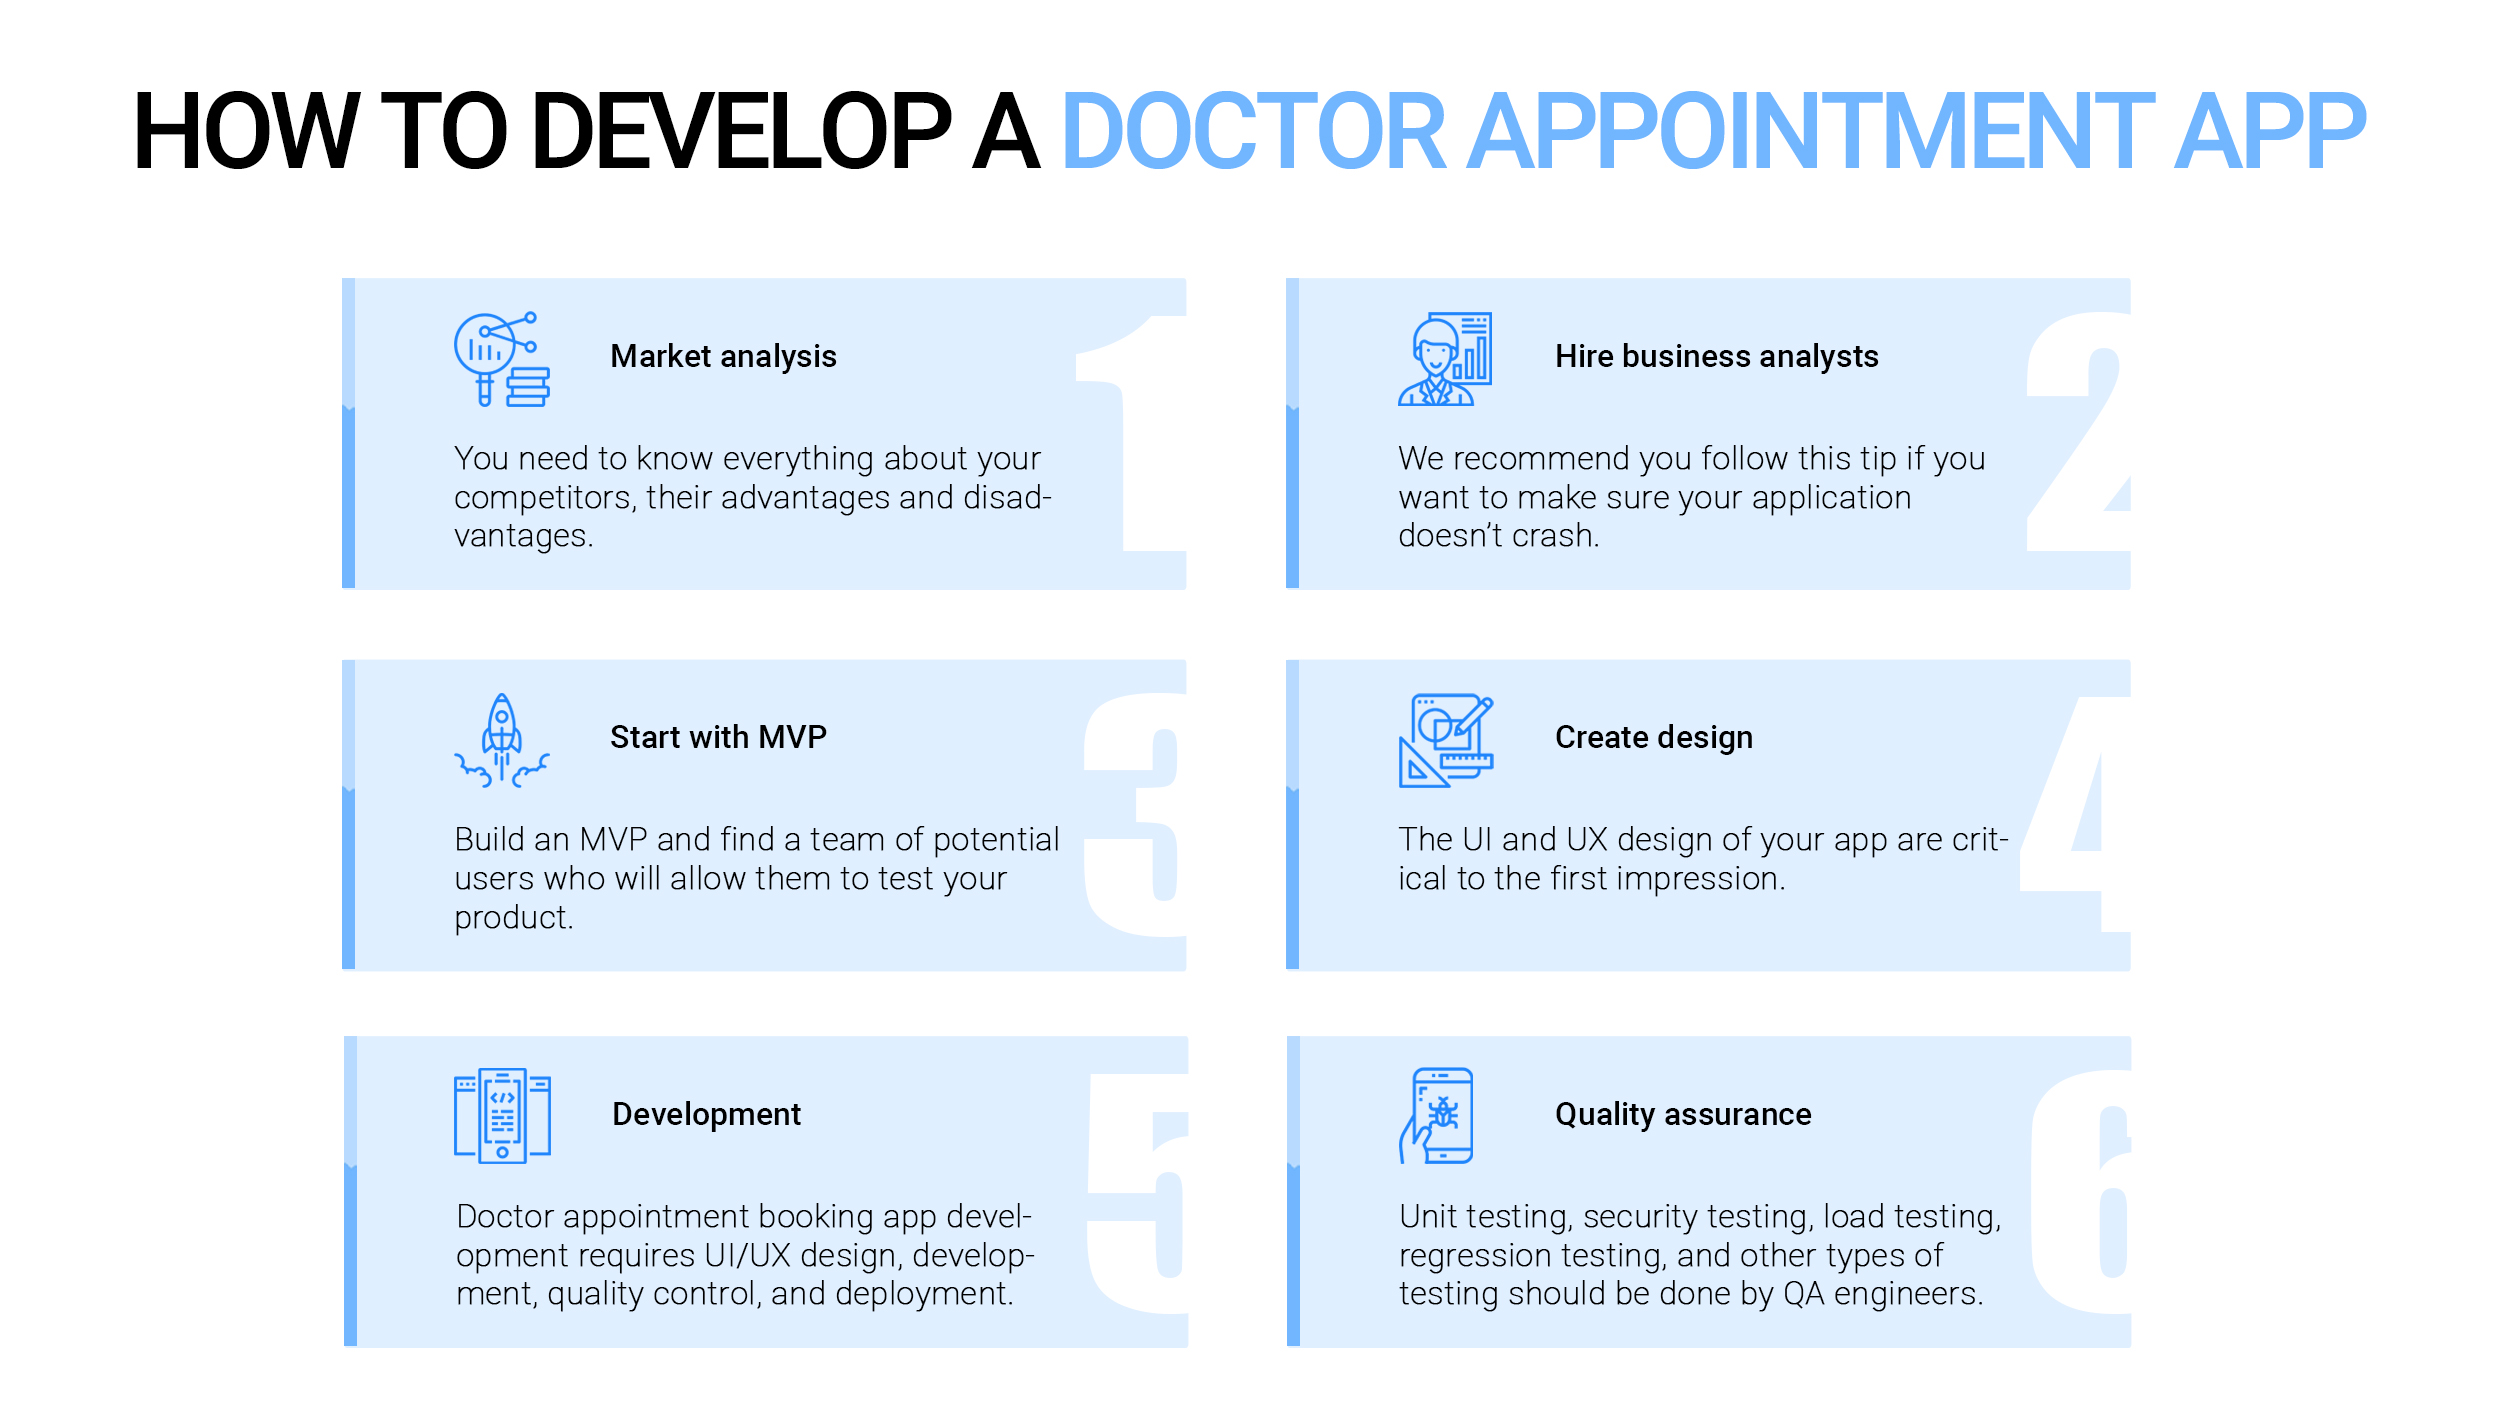 How to develop a doctor appointment booking app